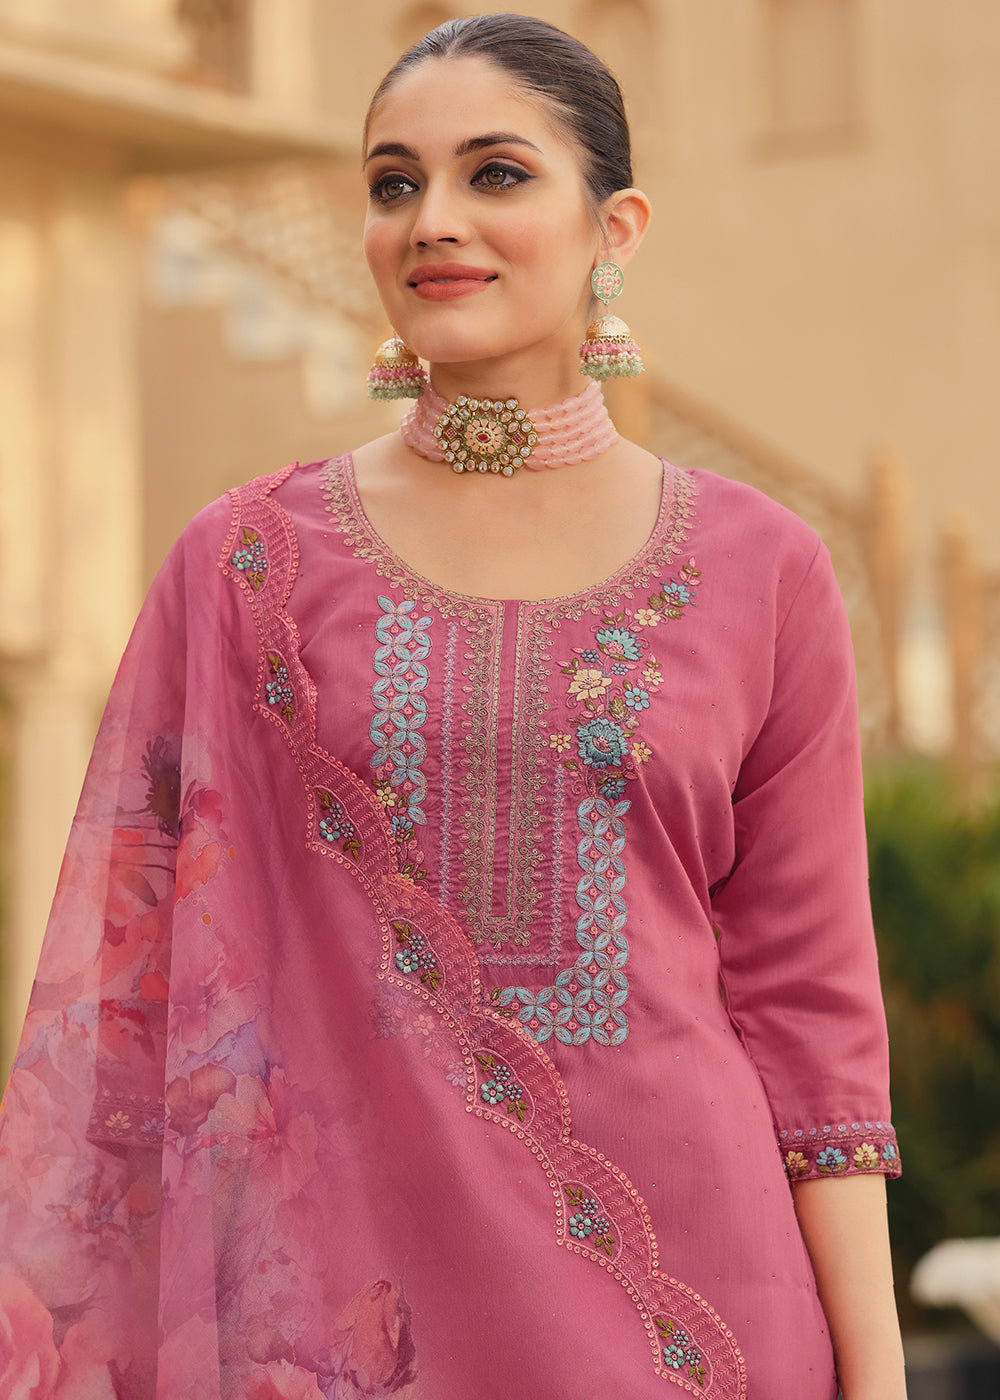 Buy Now Pink Color Embroidered Silk Pant Style Salwar Suit Online in USA, UK, Canada, Germany, Australia & Worldwide at Empress Clothing.